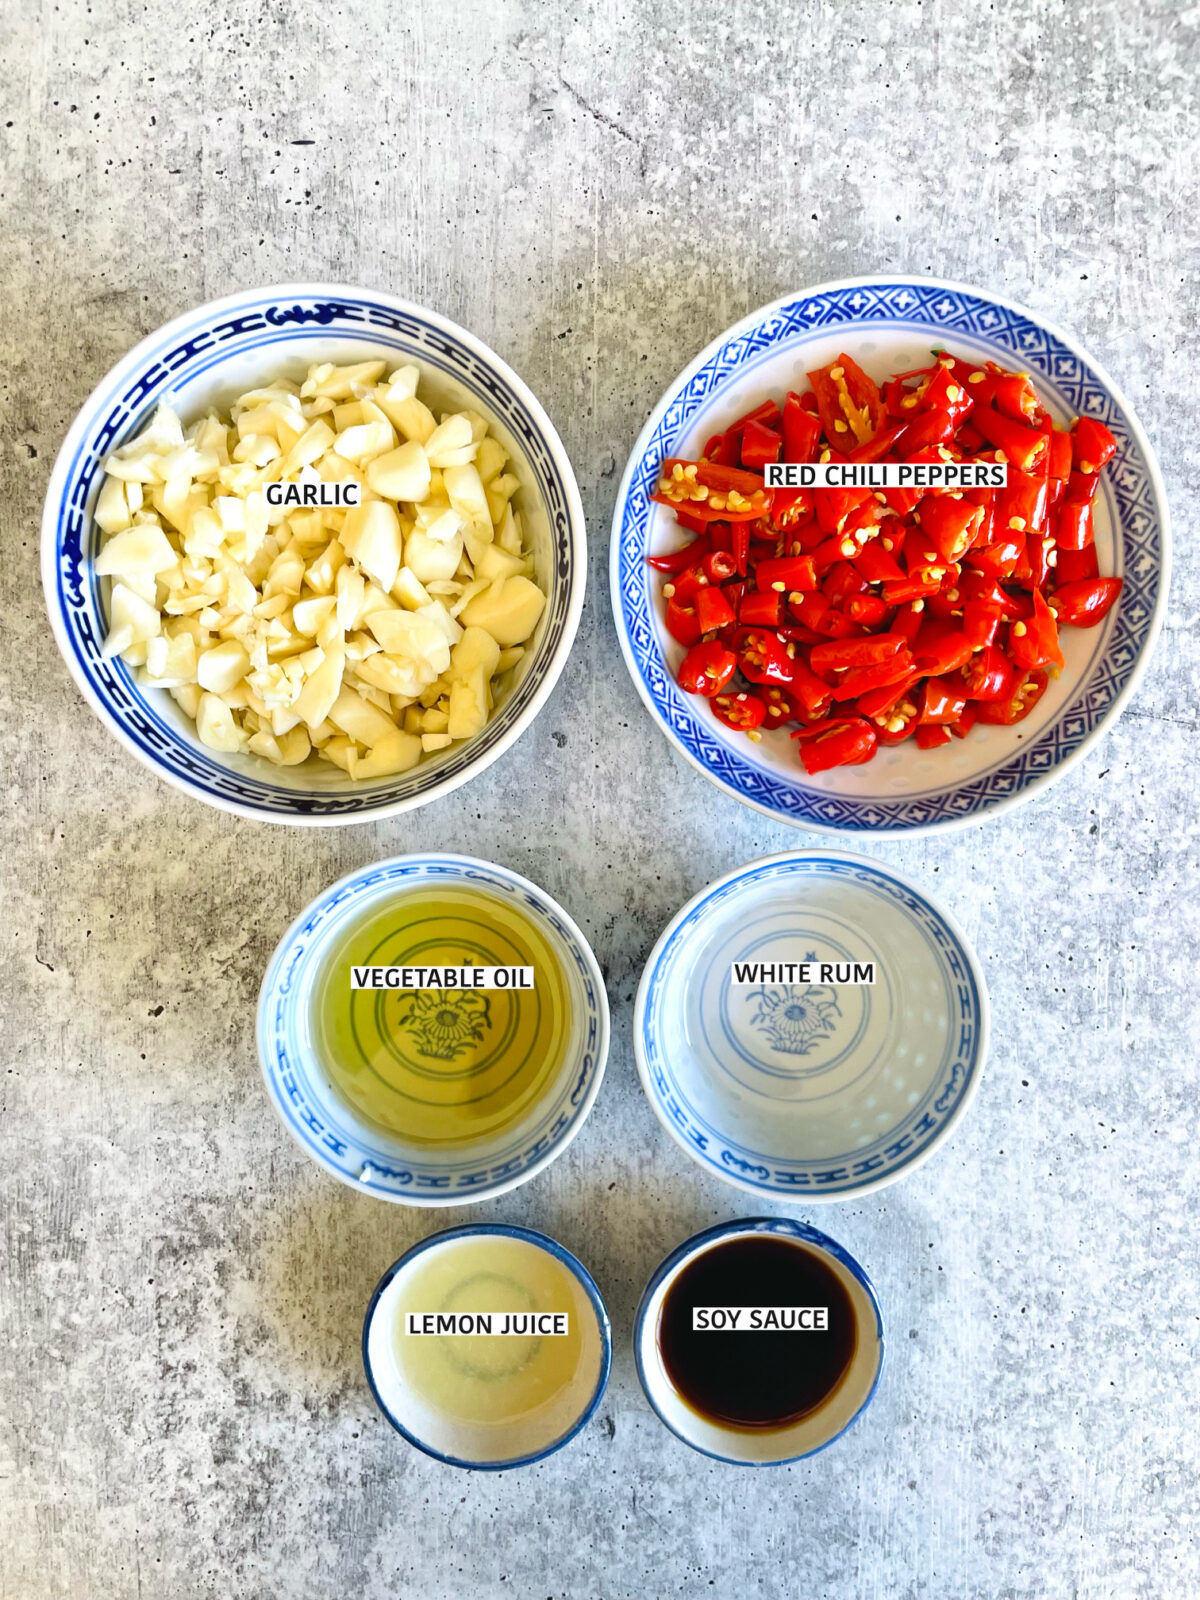 Chinese red chili paste mise en place in individual blue and white porcelain Chinese bowls with written labels: chopped garlic, chopped Thai chili peppers, vegetable oil, white rum, lemon juice and soy sauce.